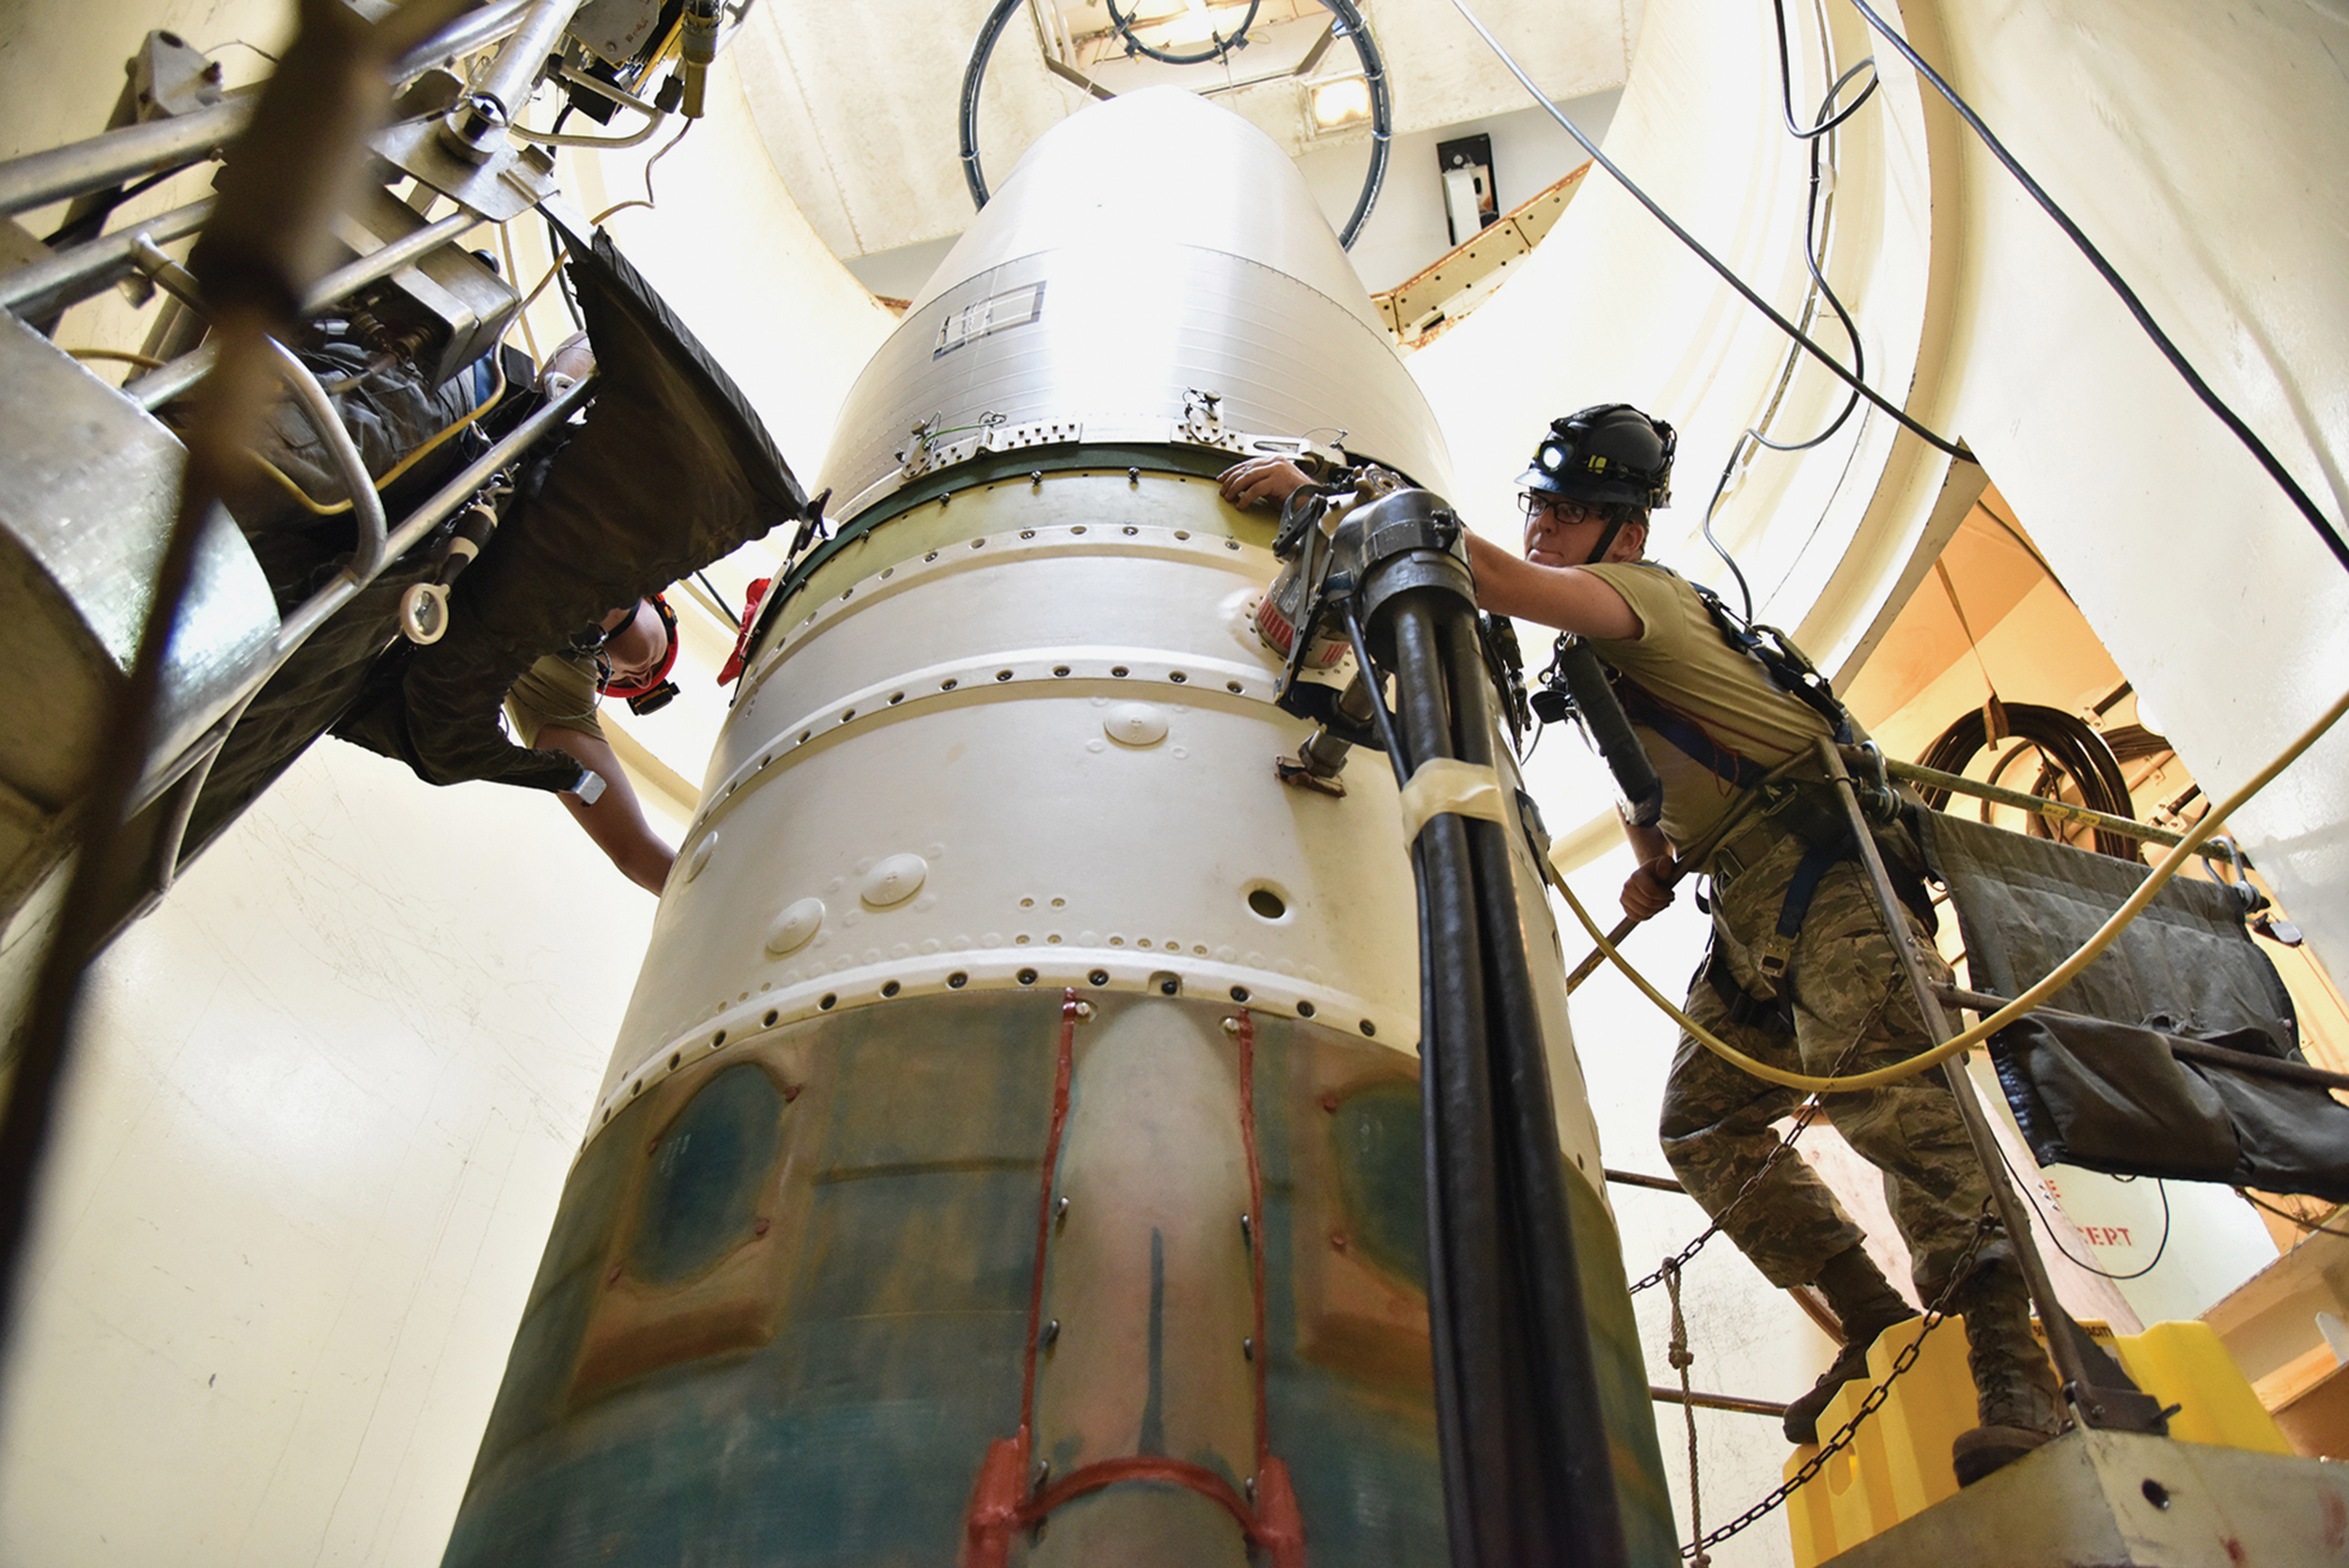 Airman 1st Class Jackson Ligon, left, and Senior Airman Jonathan Marinaccio, 341st Missile Maintenance Squadron technicians, connect reentry system to spacer on intercontinental ballistic missile during simulated electronic launch Minuteman test, September 22, 2020, at launch facility near Great Falls, Montana